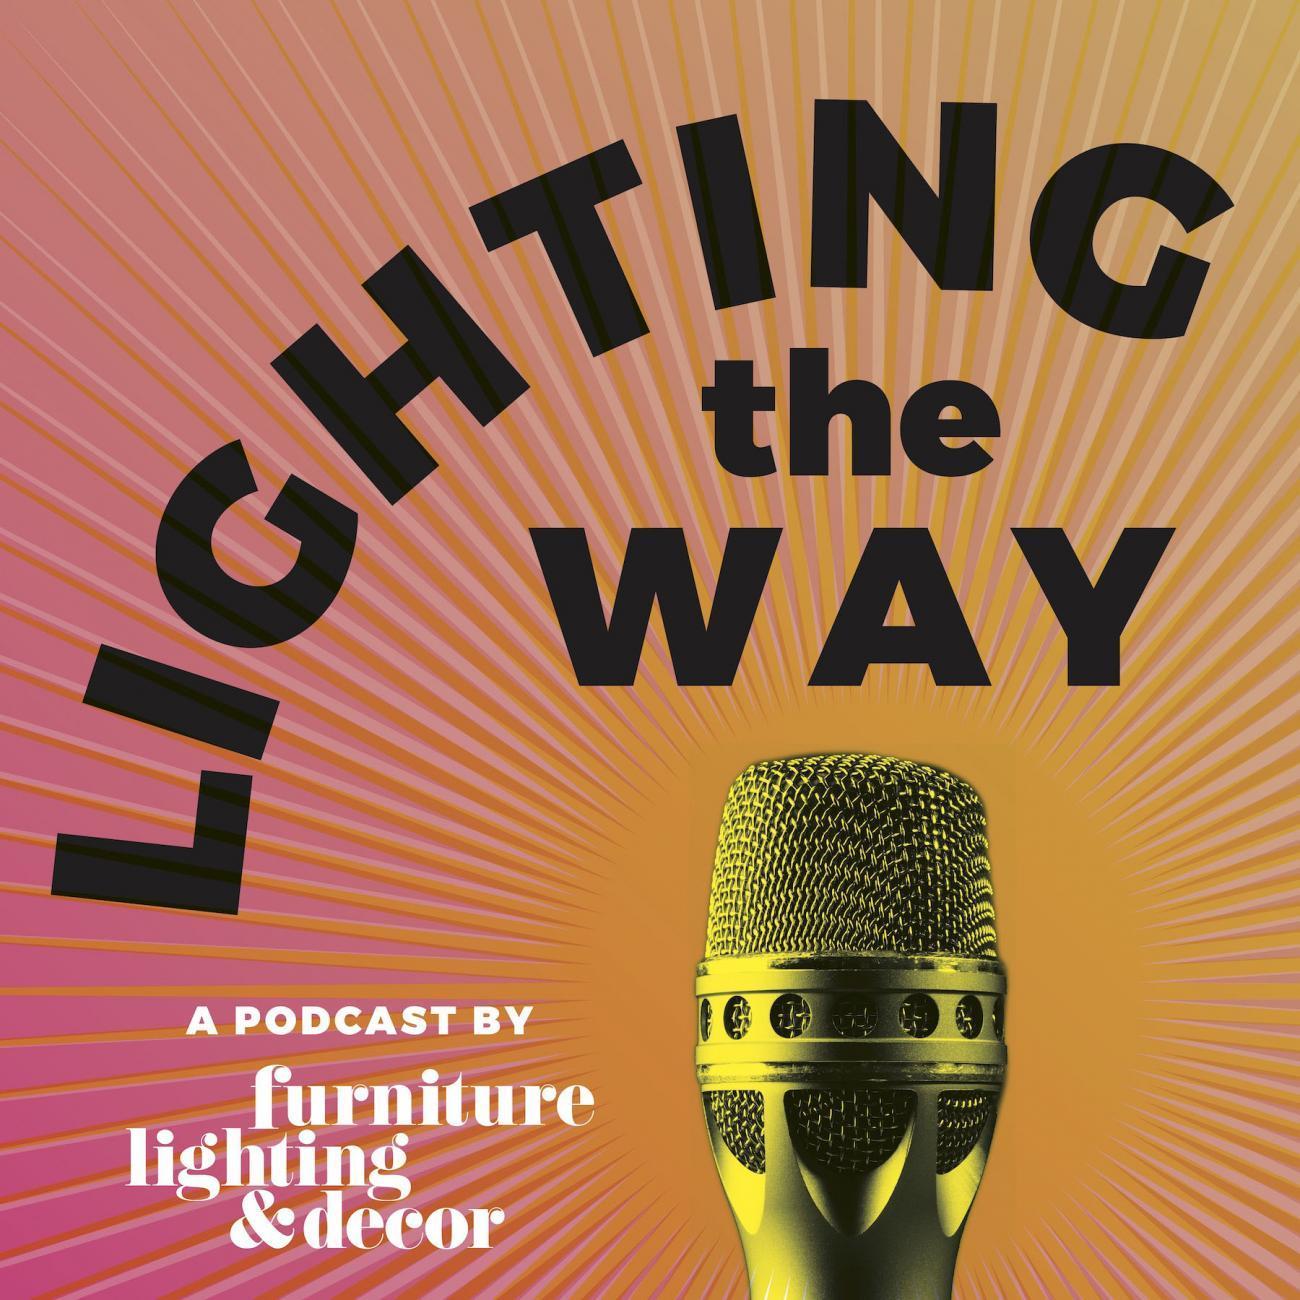 Lighting the Way Episode 12, Lighting and the Internet of Things